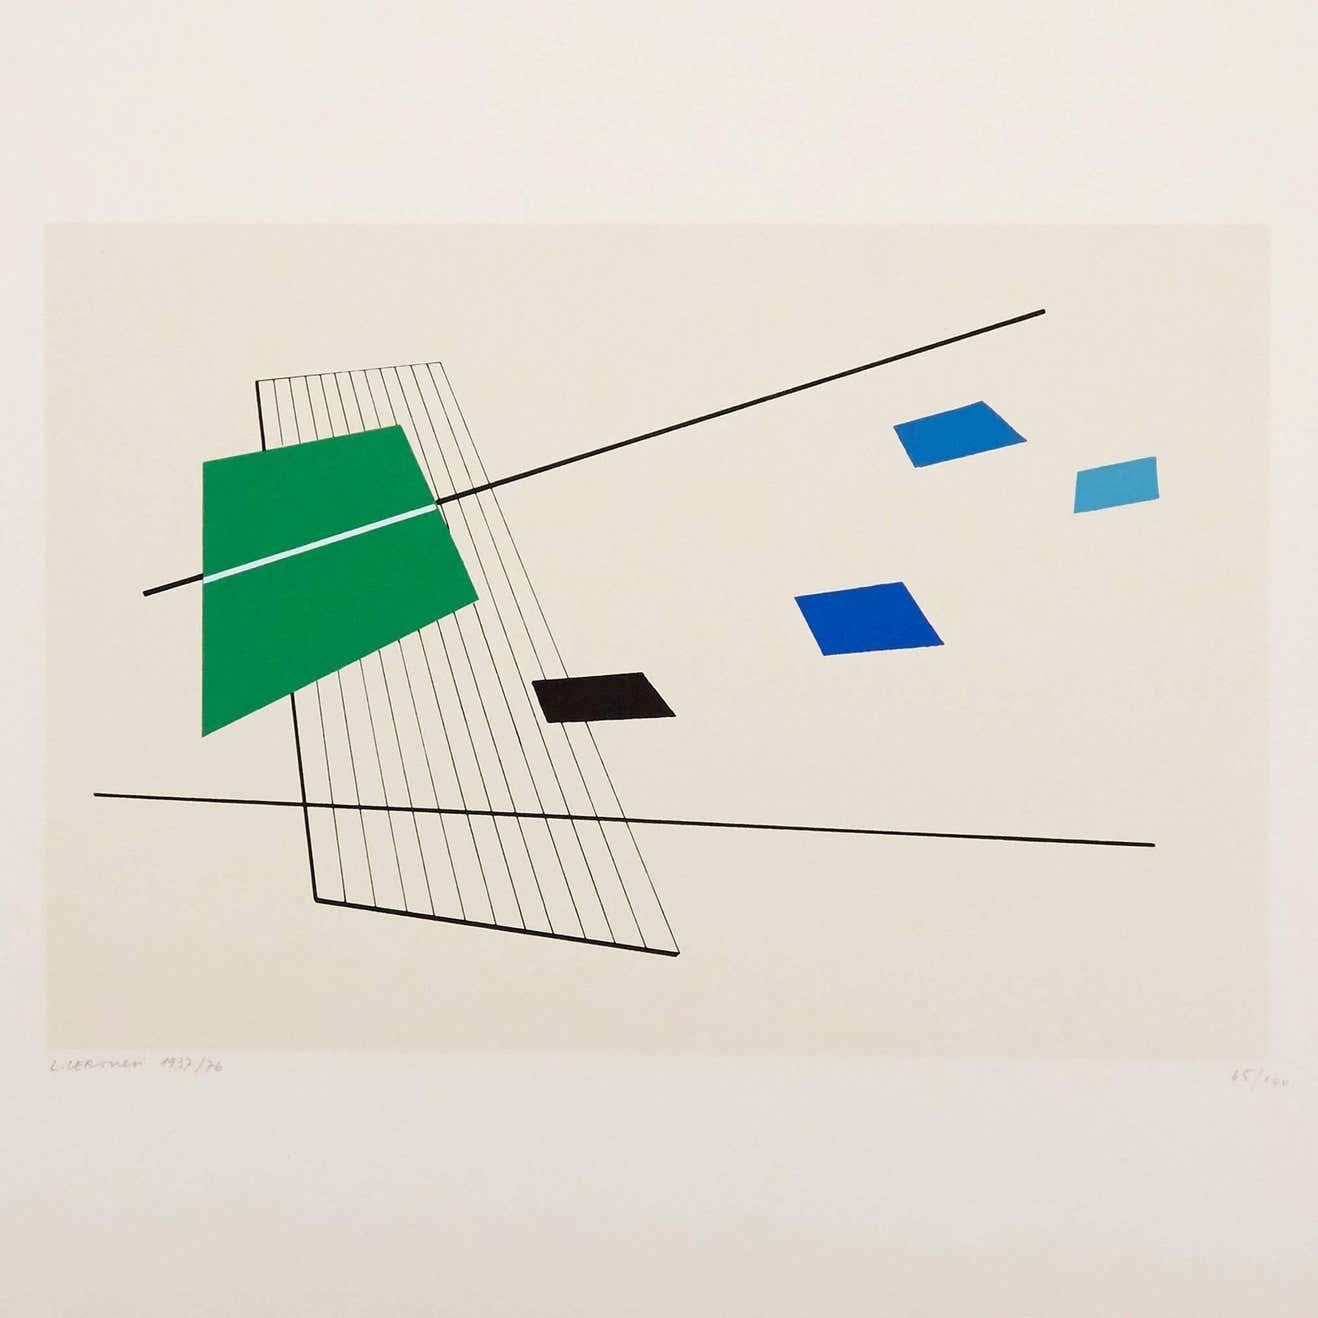 Untitled Serigraph made by Luigi Veronesi in 1976.

Signed by hand and numbered 65 / 100.

In very good condition.

Measurements: 70 x 50 cm.